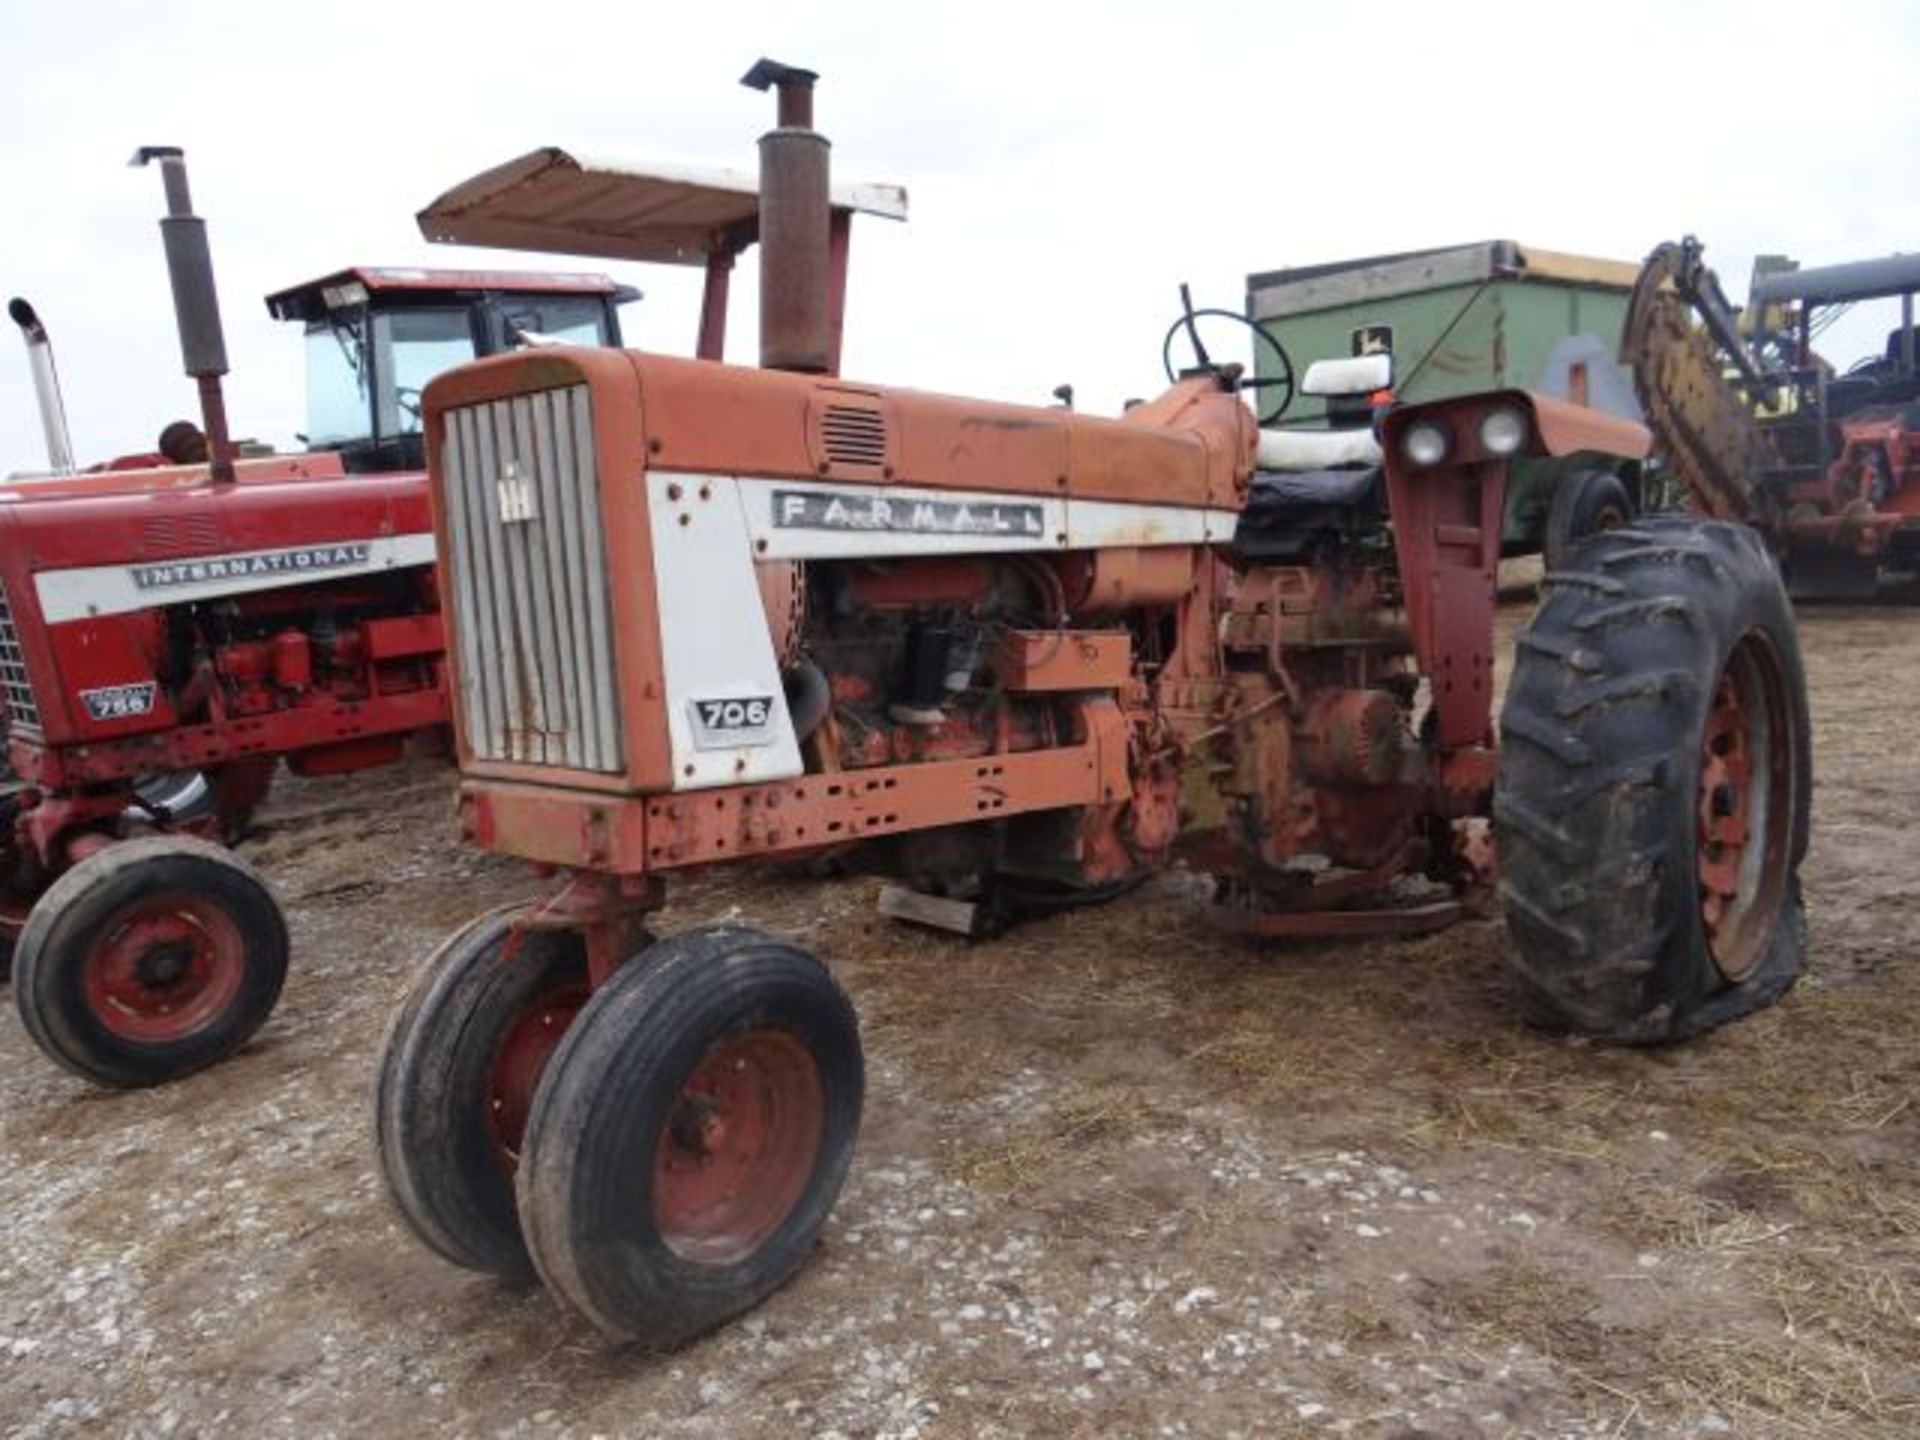 IH 706 Tractor Does Not Run